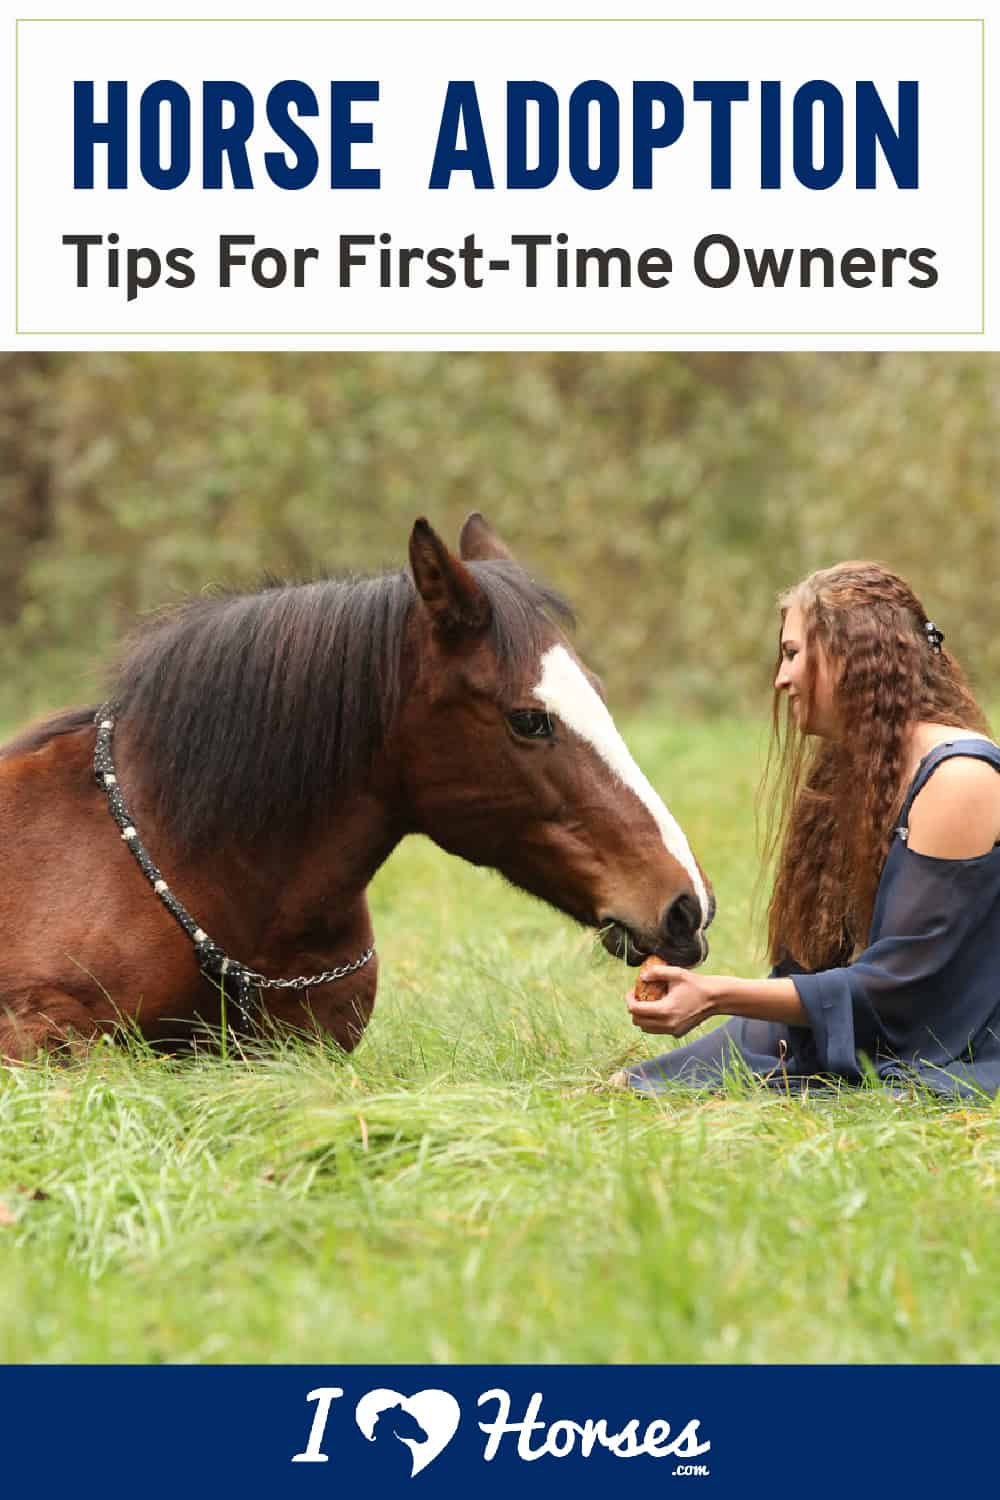 Horse Adoption Tips For First-Time Horse Owners